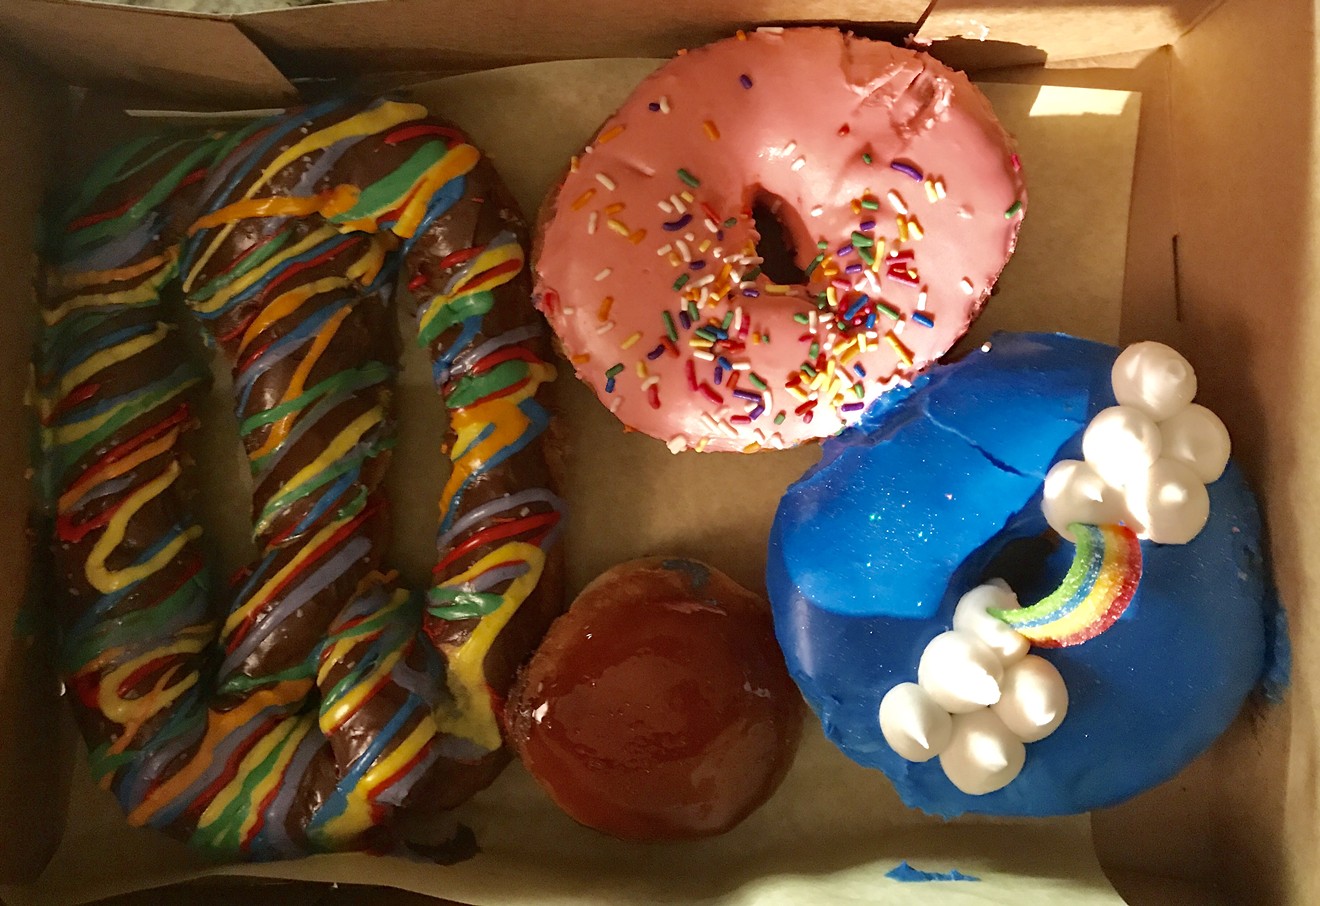 Four delicious doughnuts from Donut Bar, which will be coming to Scottsdale.